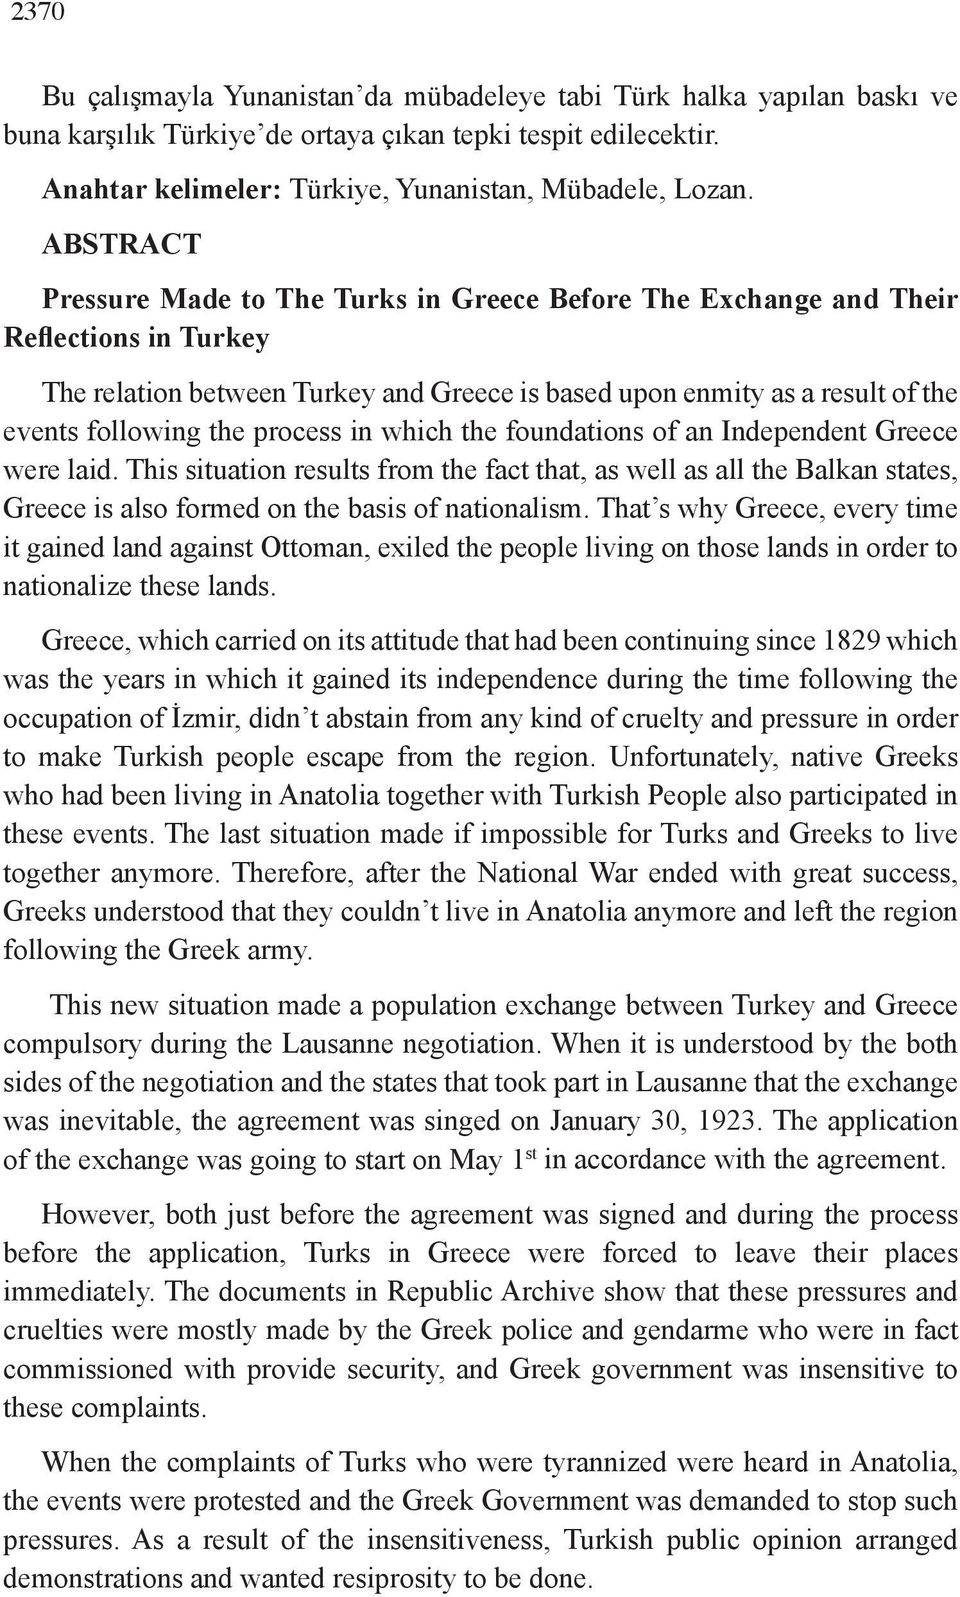 process in which the foundations of an Independent Greece were laid. This situation results from the fact that, as well as all the Balkan states, Greece is also formed on the basis of nationalism.